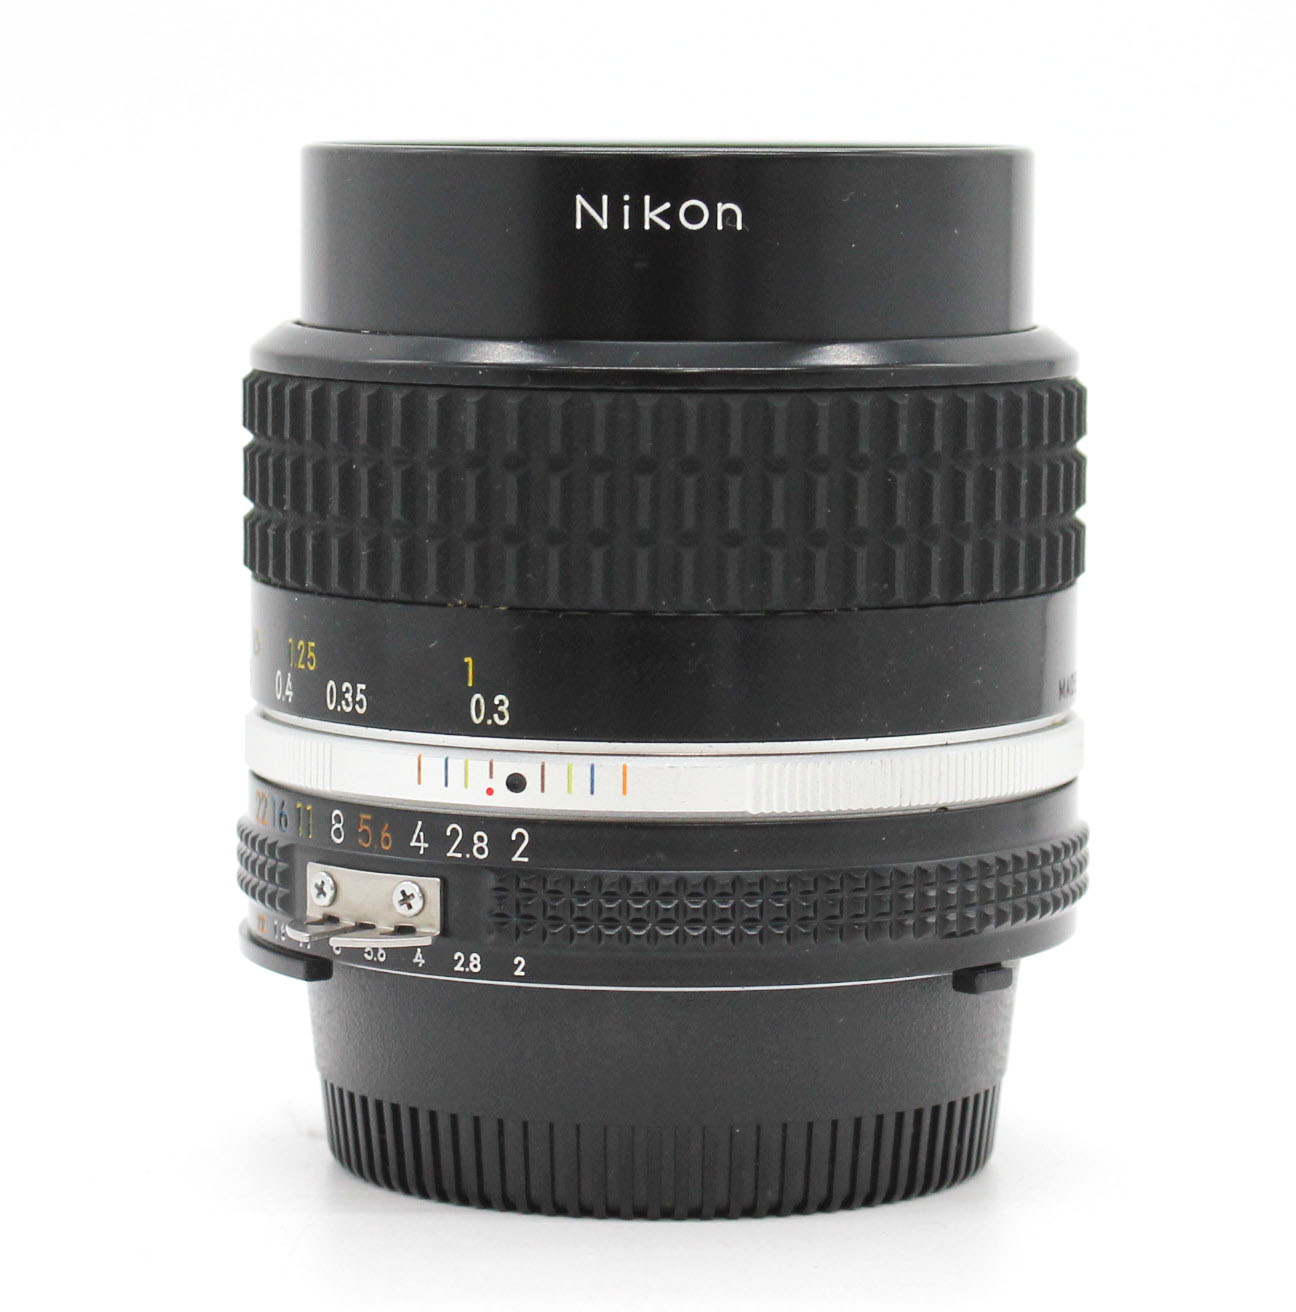 Nikon Ai-s Ais Nikkor 35mm F/2 Wide Angle MF Lens S/N32* SIC Version with Hood HN-3 from Japan Photo 4